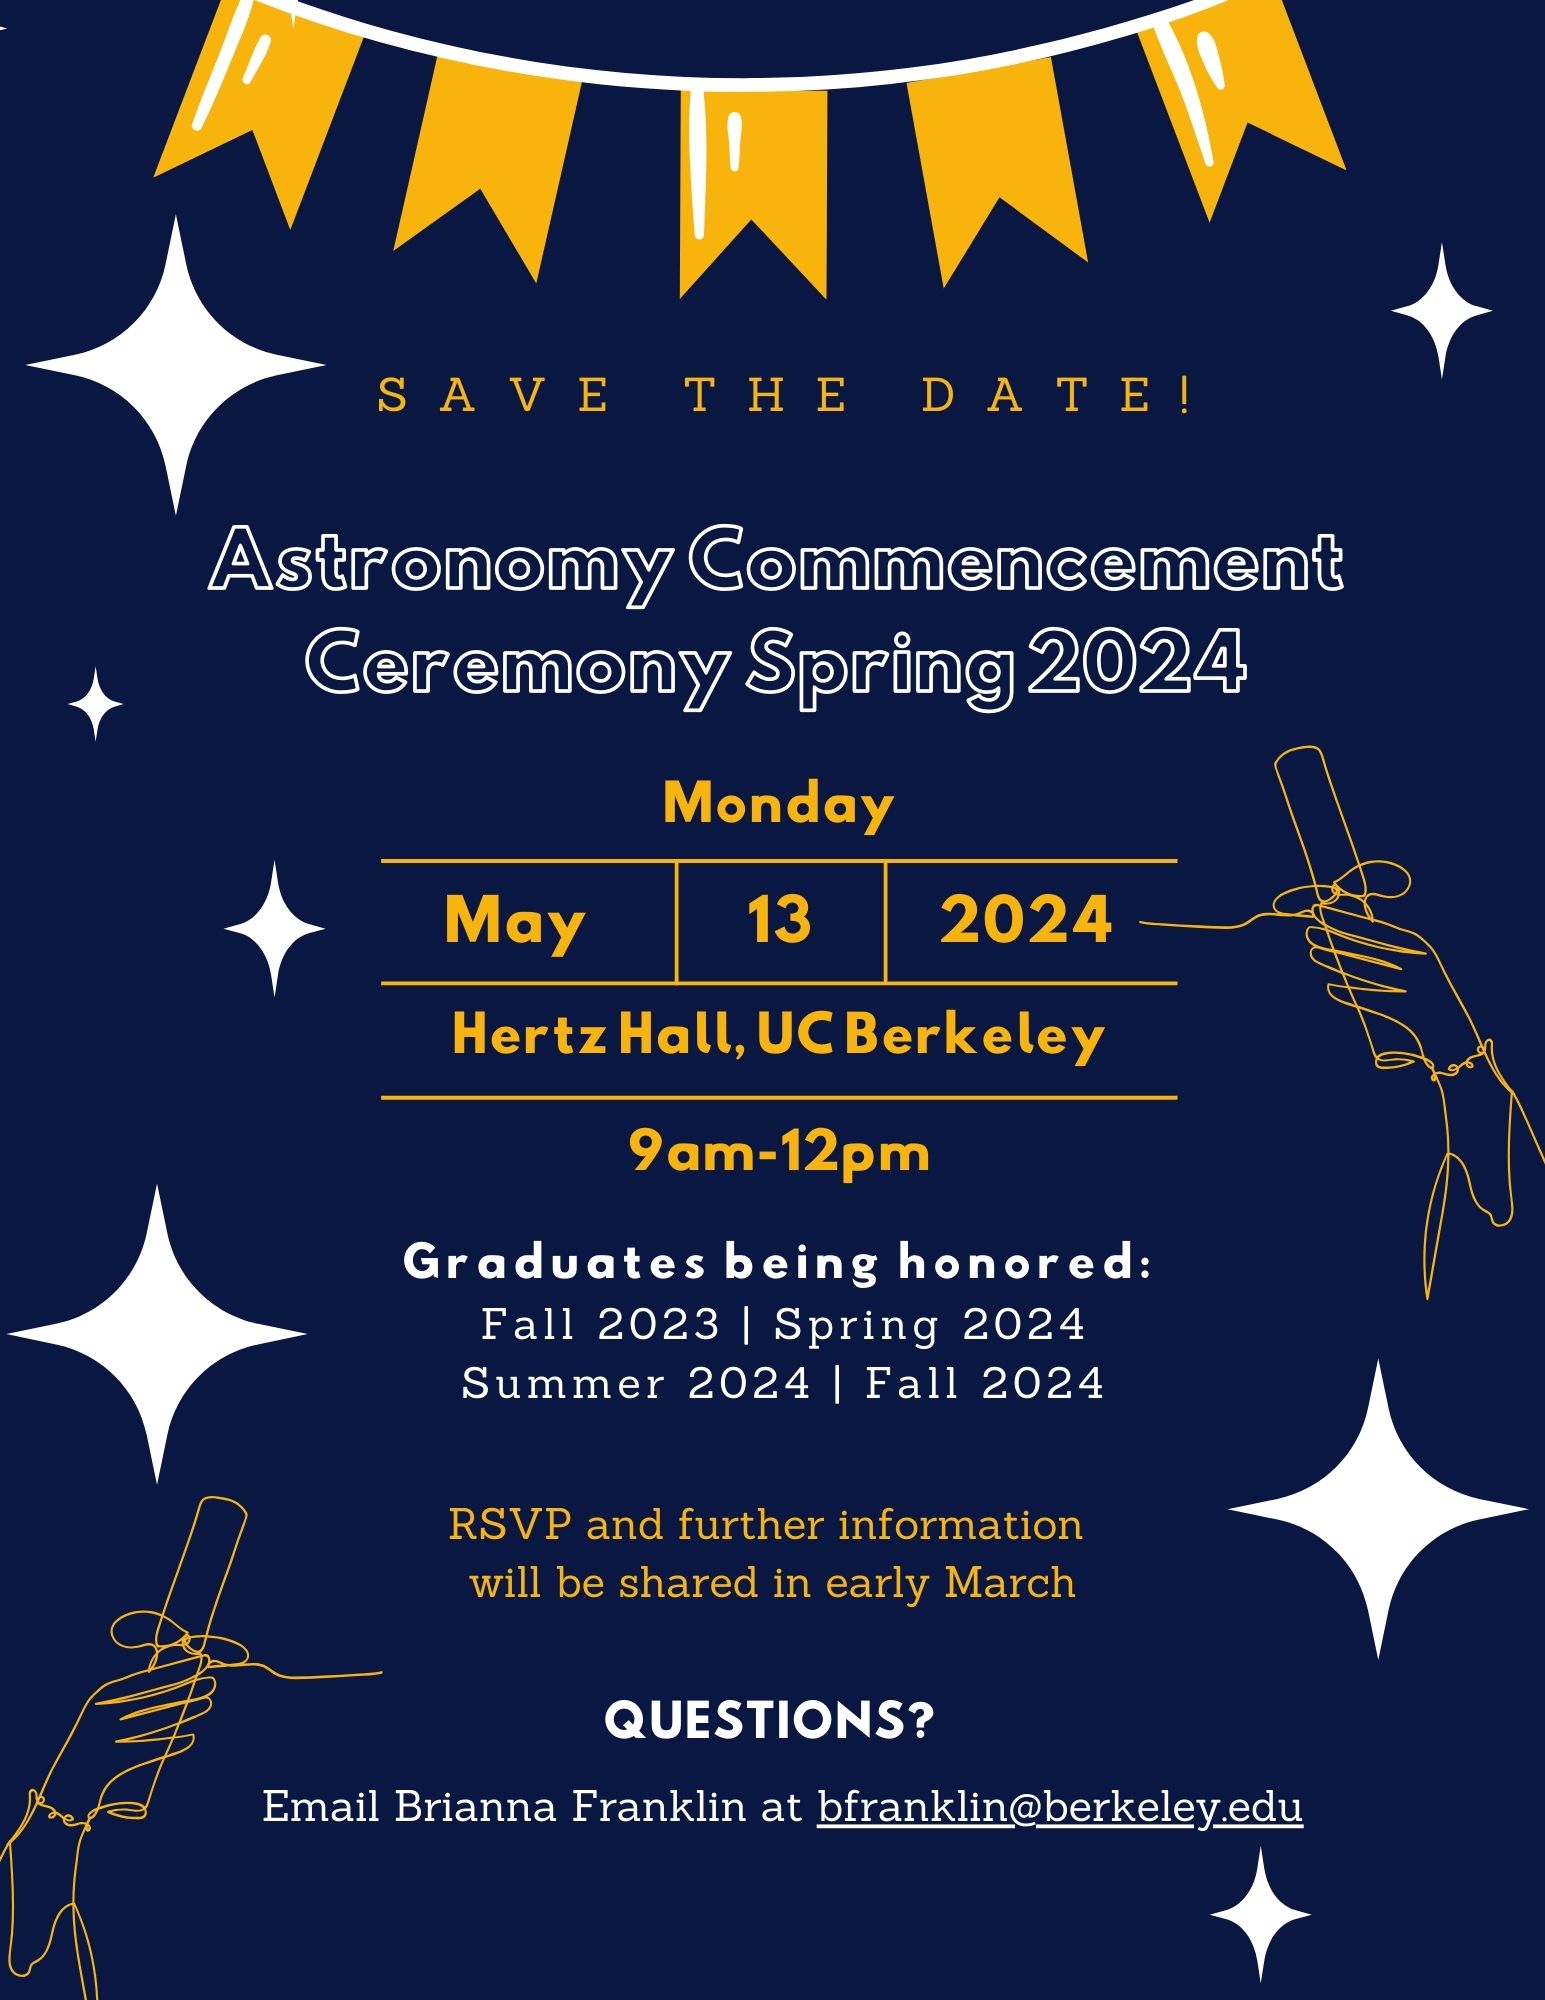 Spring 2024 Astronomy Commencement Ceremony Astronomy Department